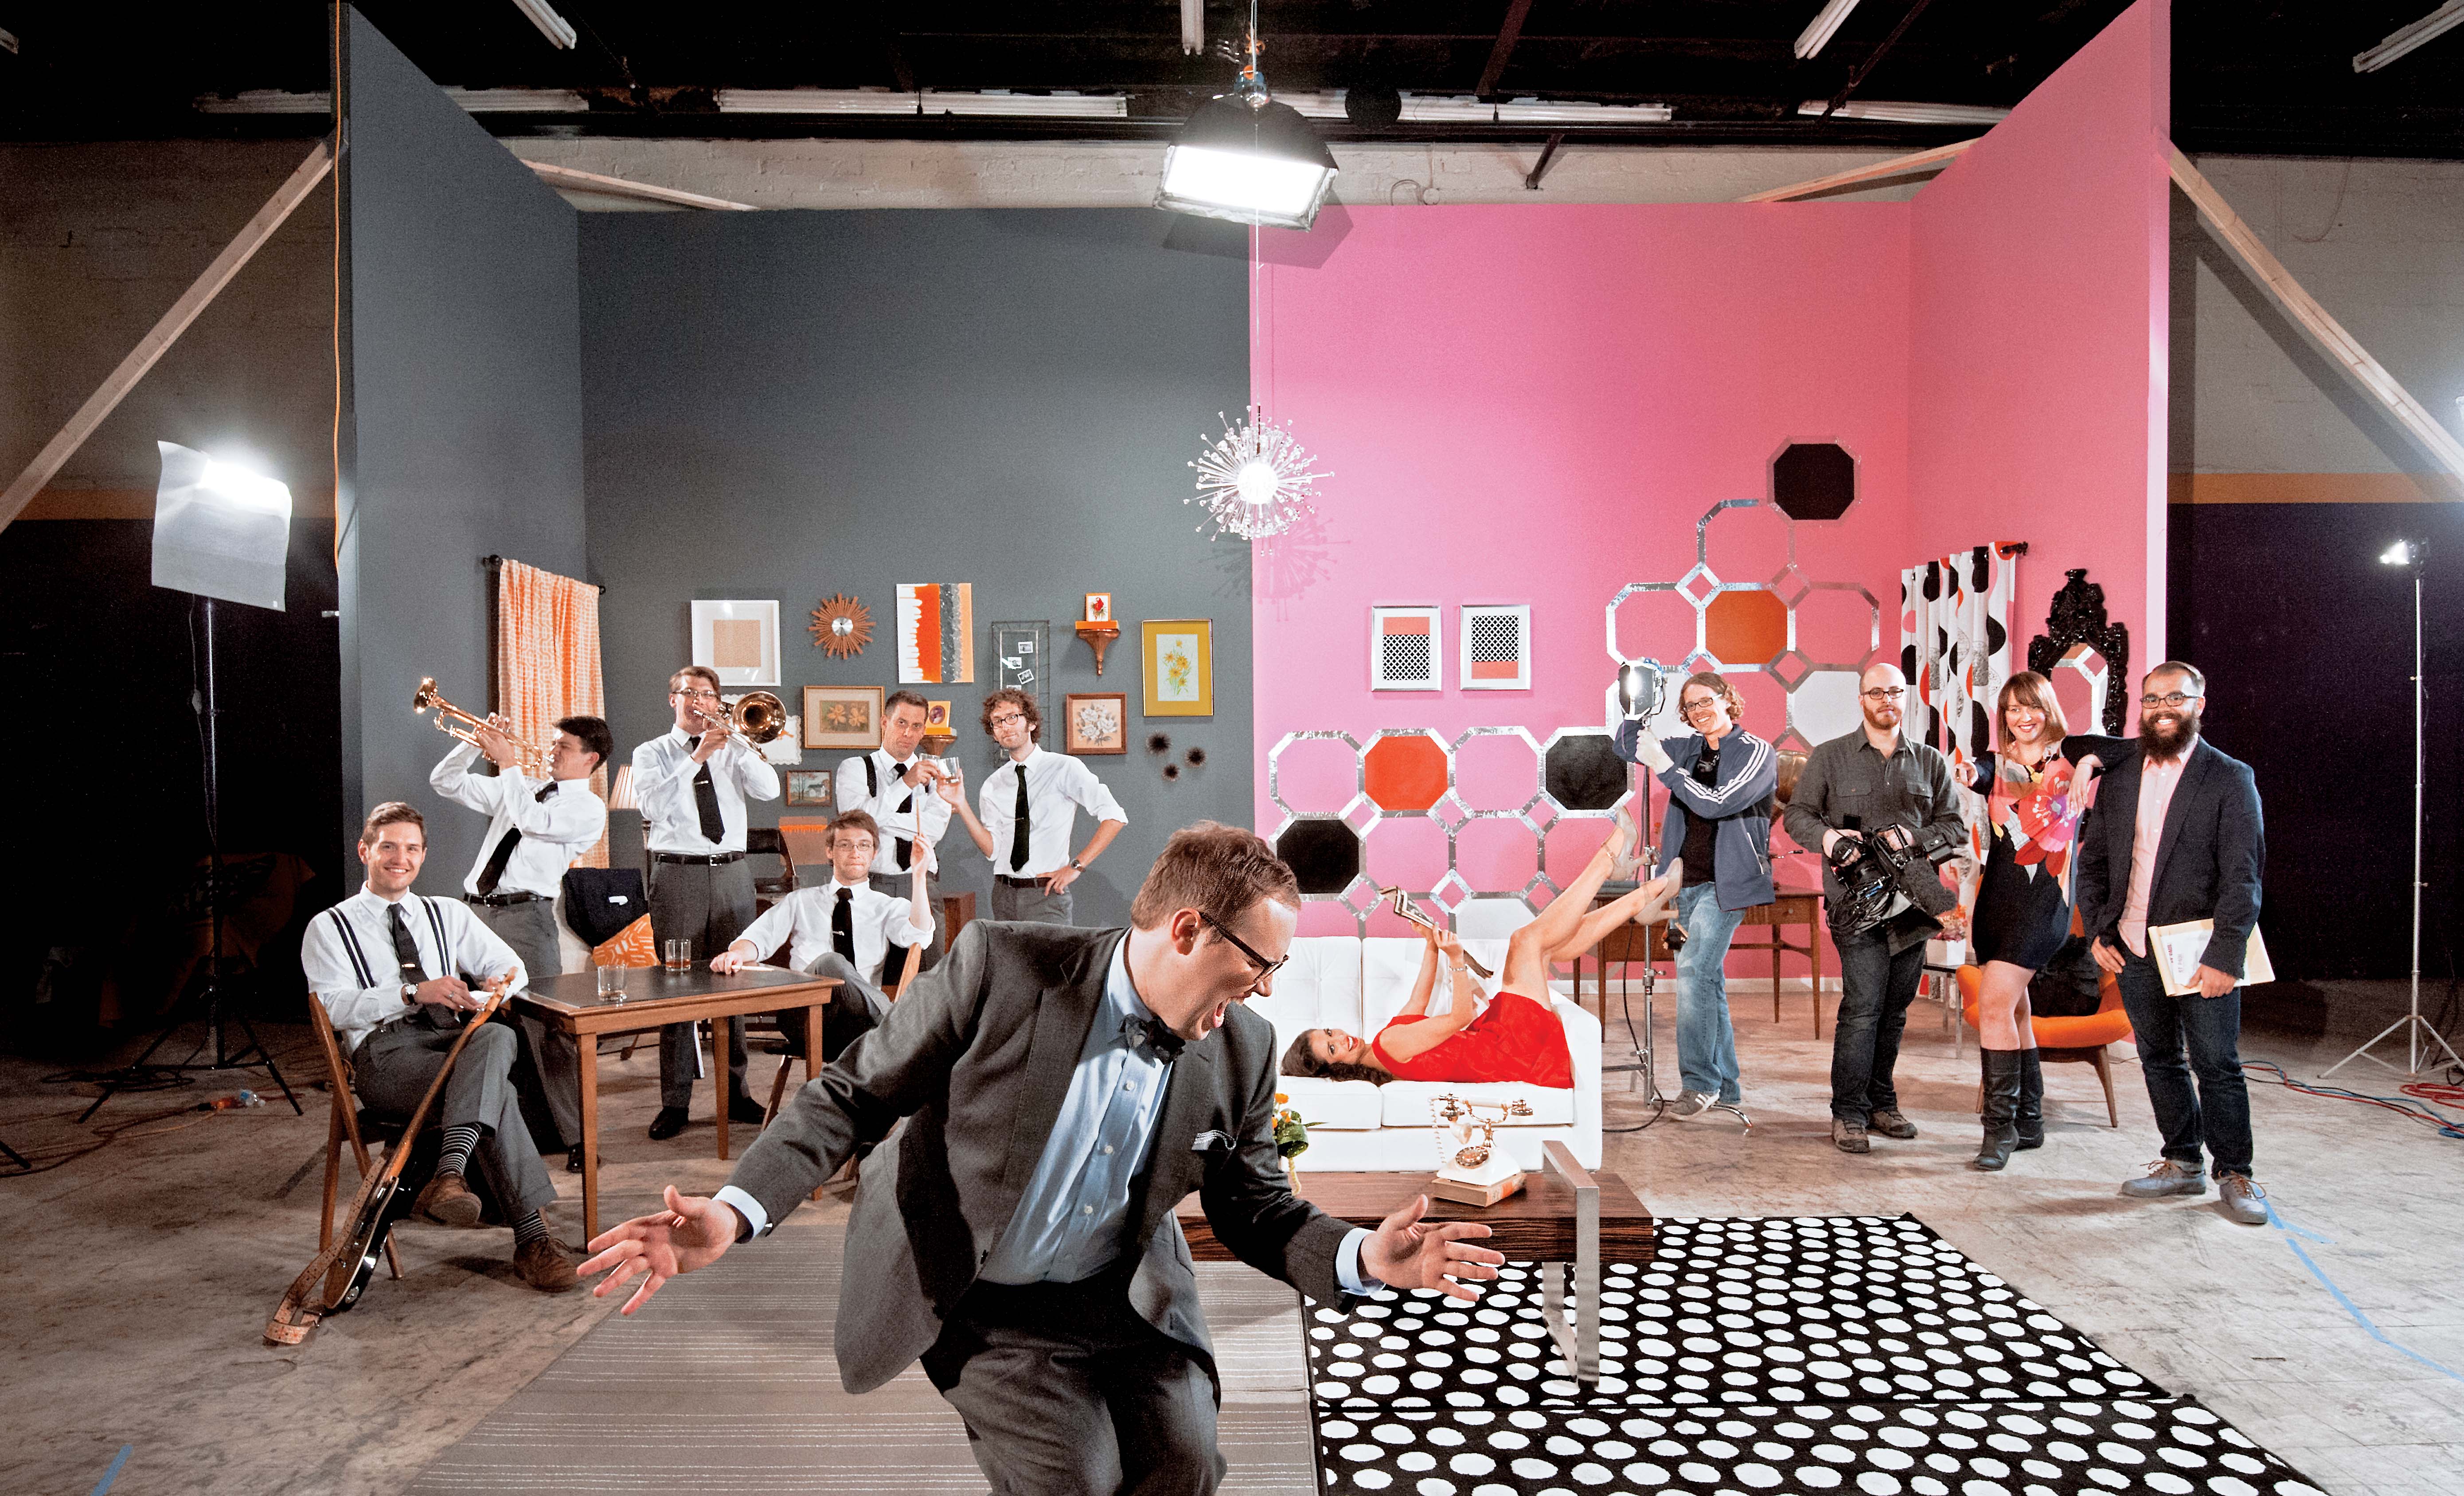 Set of Call Me (music video for St. Paul and the Broken Bones).